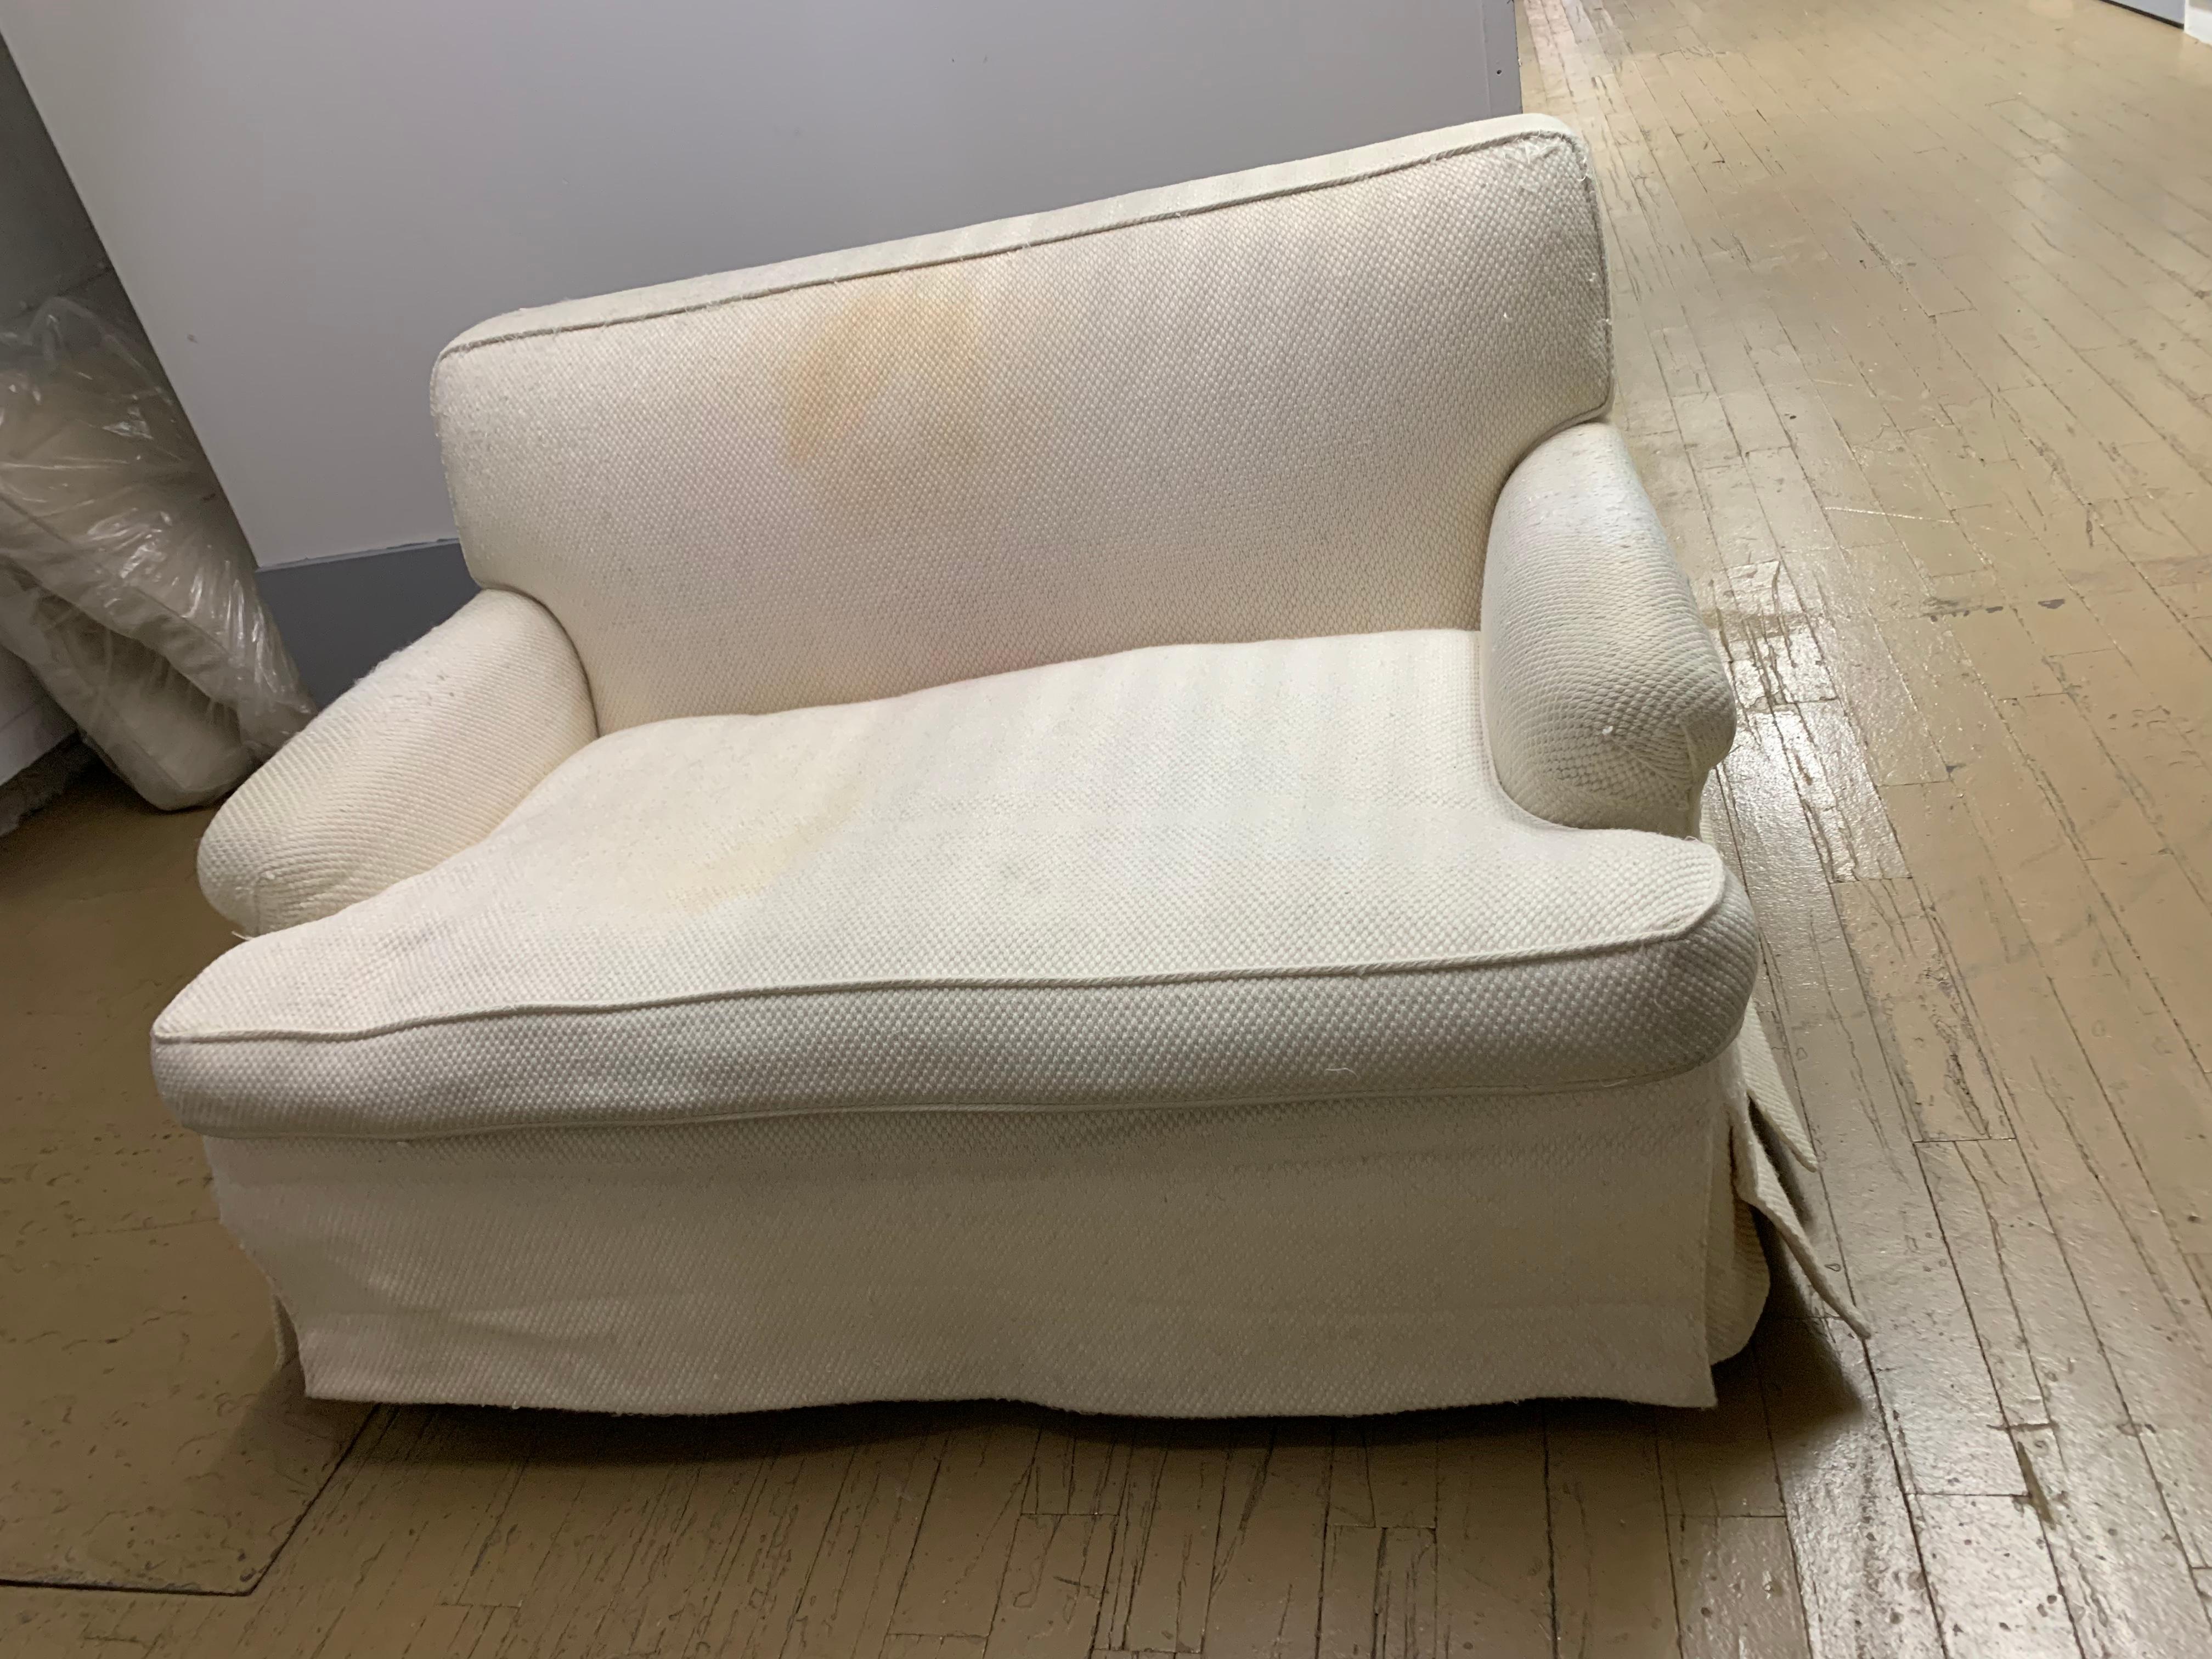 Midcentury Baker upholstered love seat
Our living room furniture from our childhood home included this upholstered love seat along with an upholstered armchair and sofa of the same aesthetic
upholstery is white cotton blend and needs a good